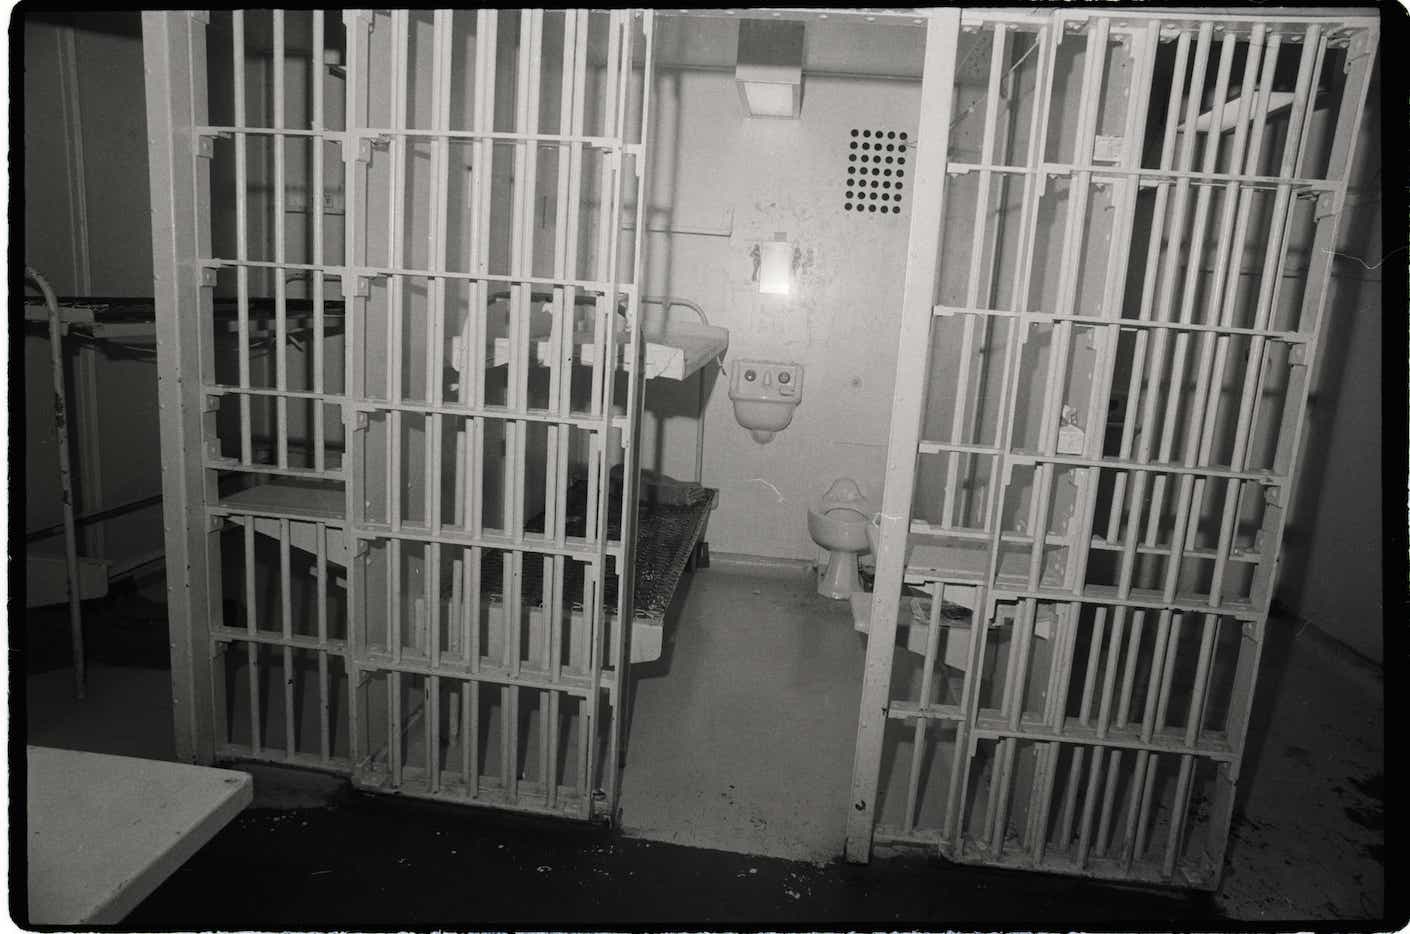 View Of Prisoner Cell at Rikers Island from 1974